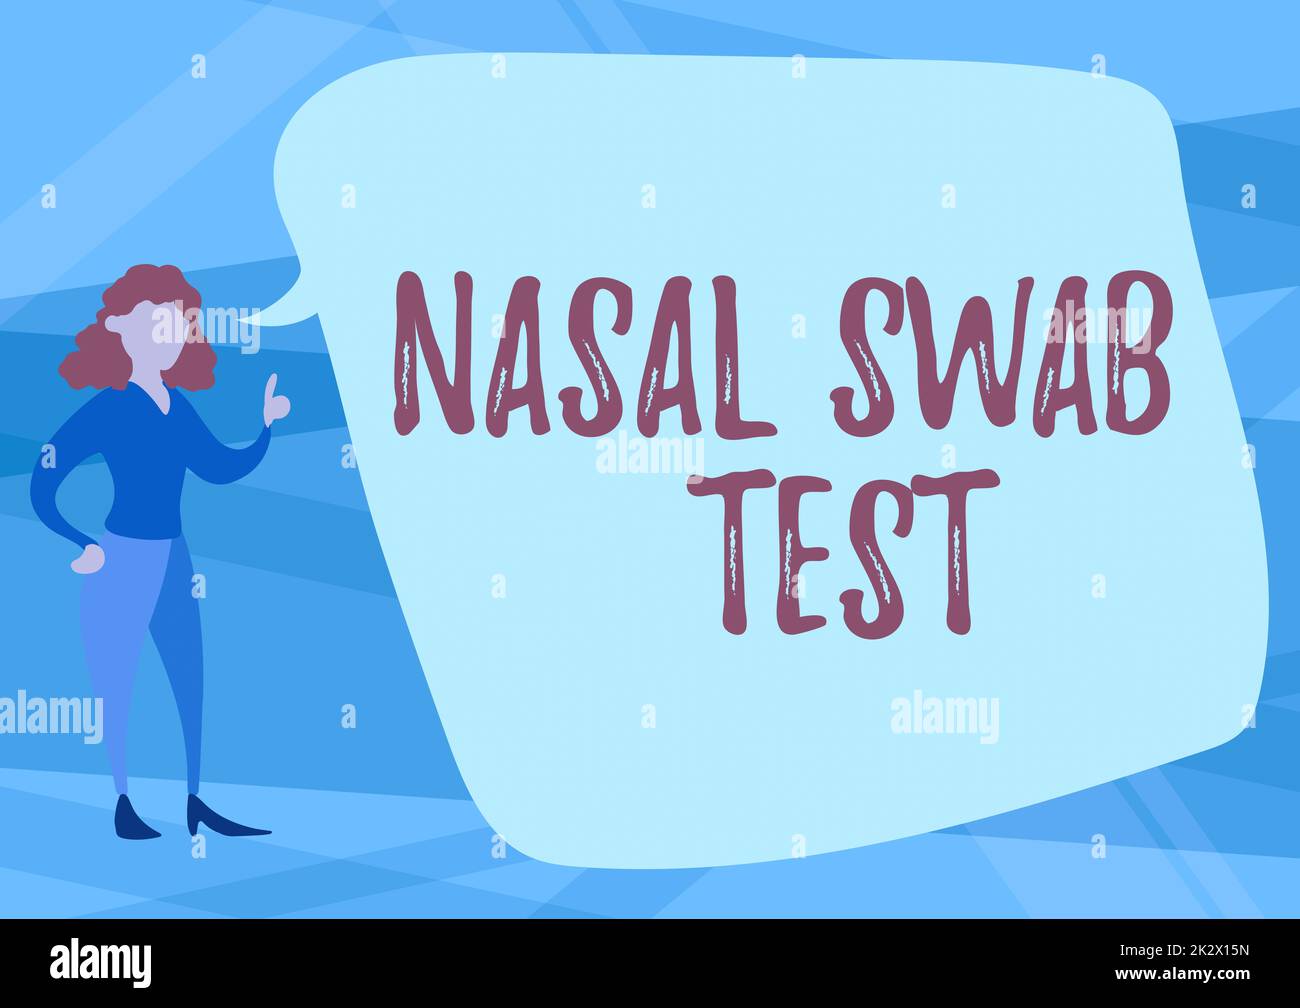 Writing displaying text Nasal Swab Test. Business approach diagnosing an upper respiratory tract infection through nasal secretion Illustration Of Woman Speaking In Chat Cloud Discussing Ideas. Stock Photo